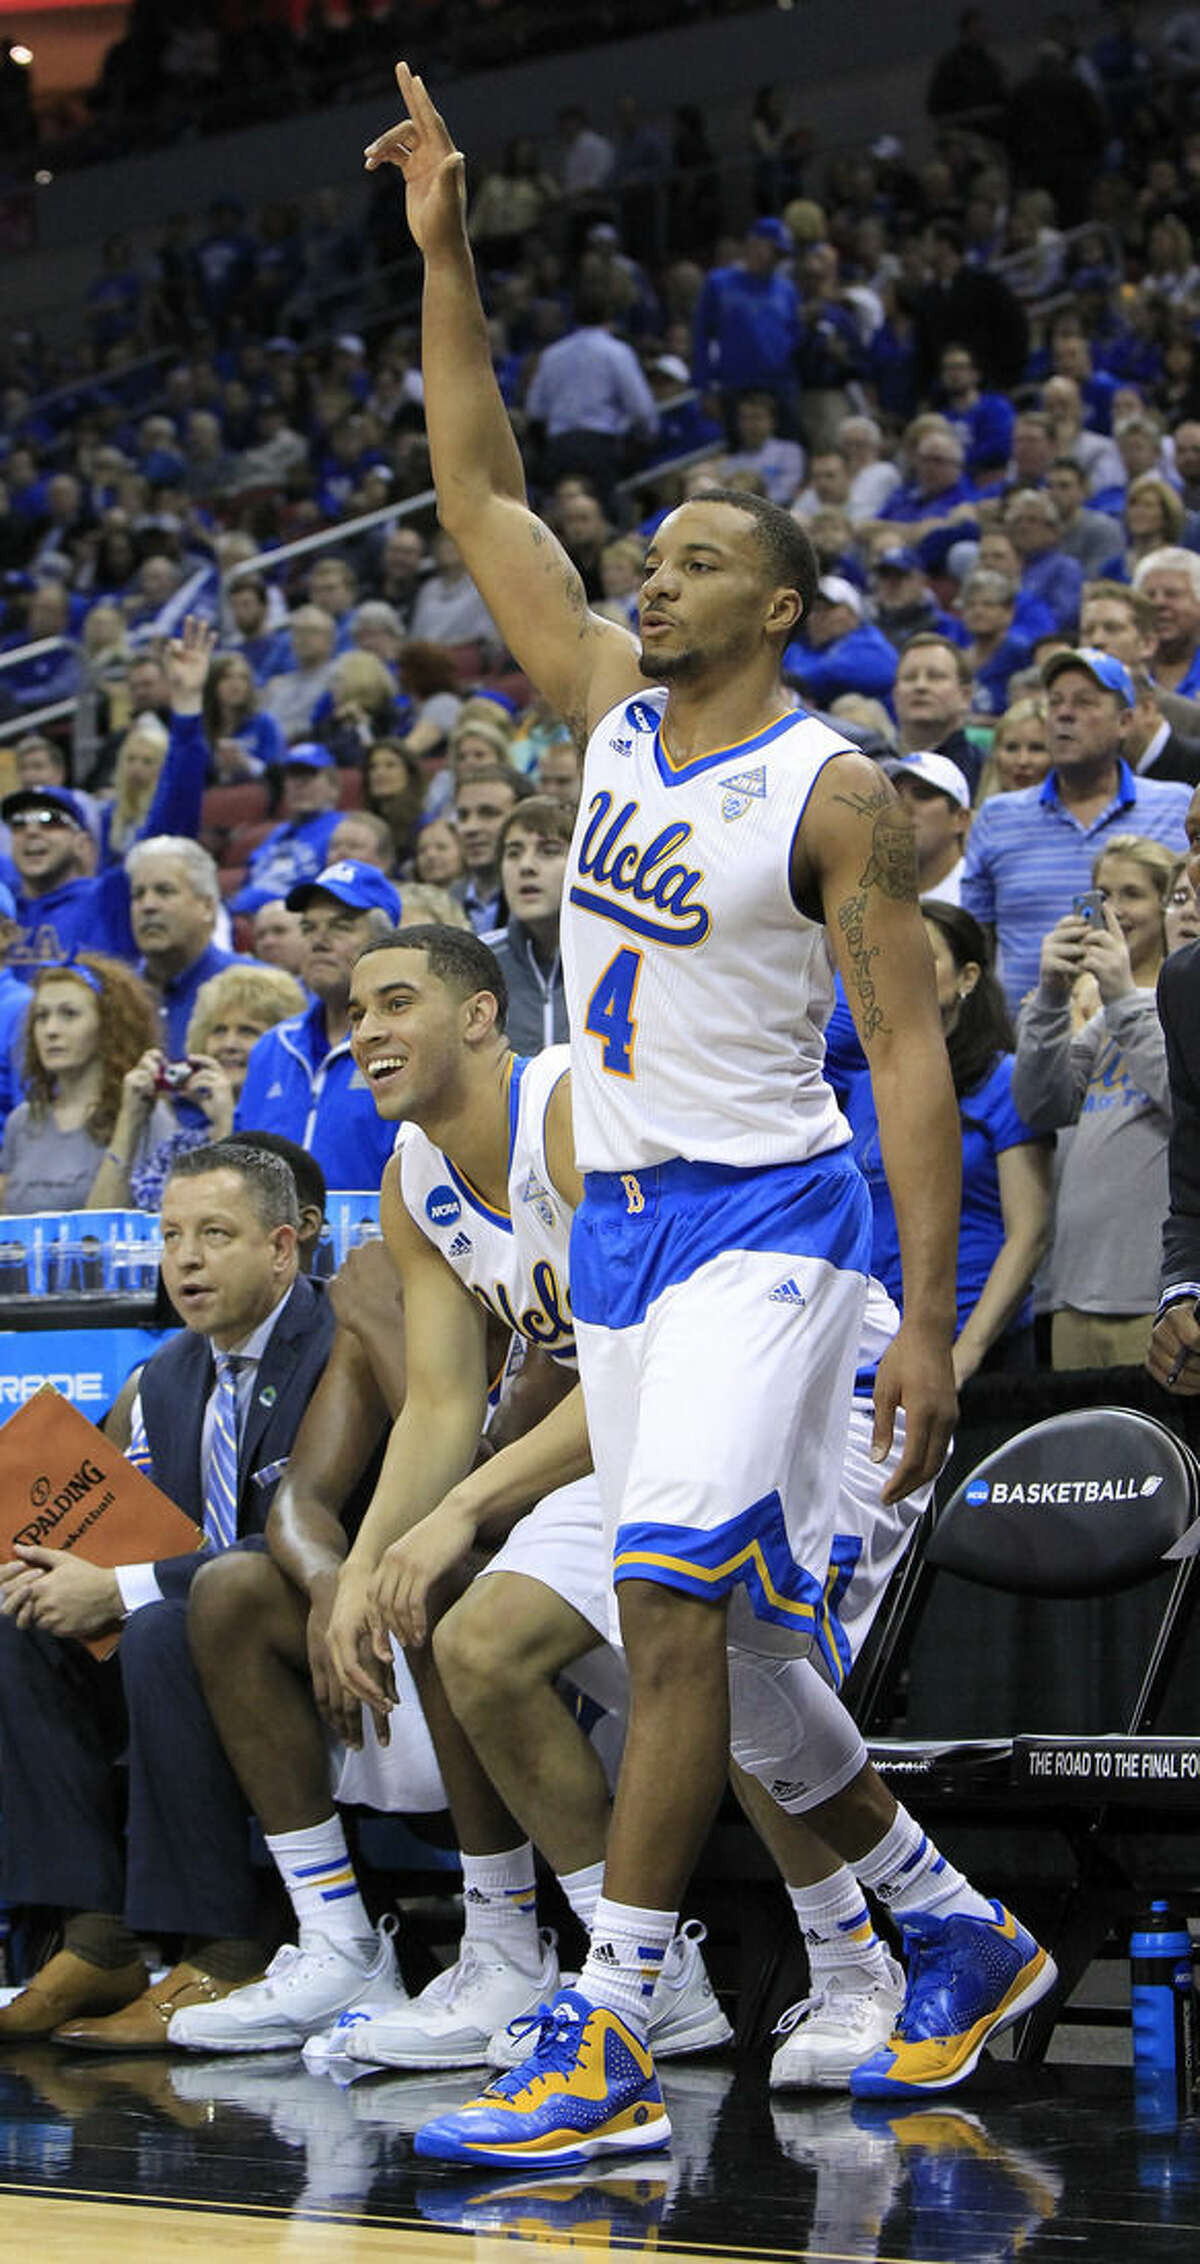 UCLA guard Norman Powell celebrates as the clock winds down during the second half of an NCAA tournament third round college basketball game in Louisville, Ky., Saturday, March 21, 2015. UCLA won the game 92-75. (AP Photo/David Stephenson)